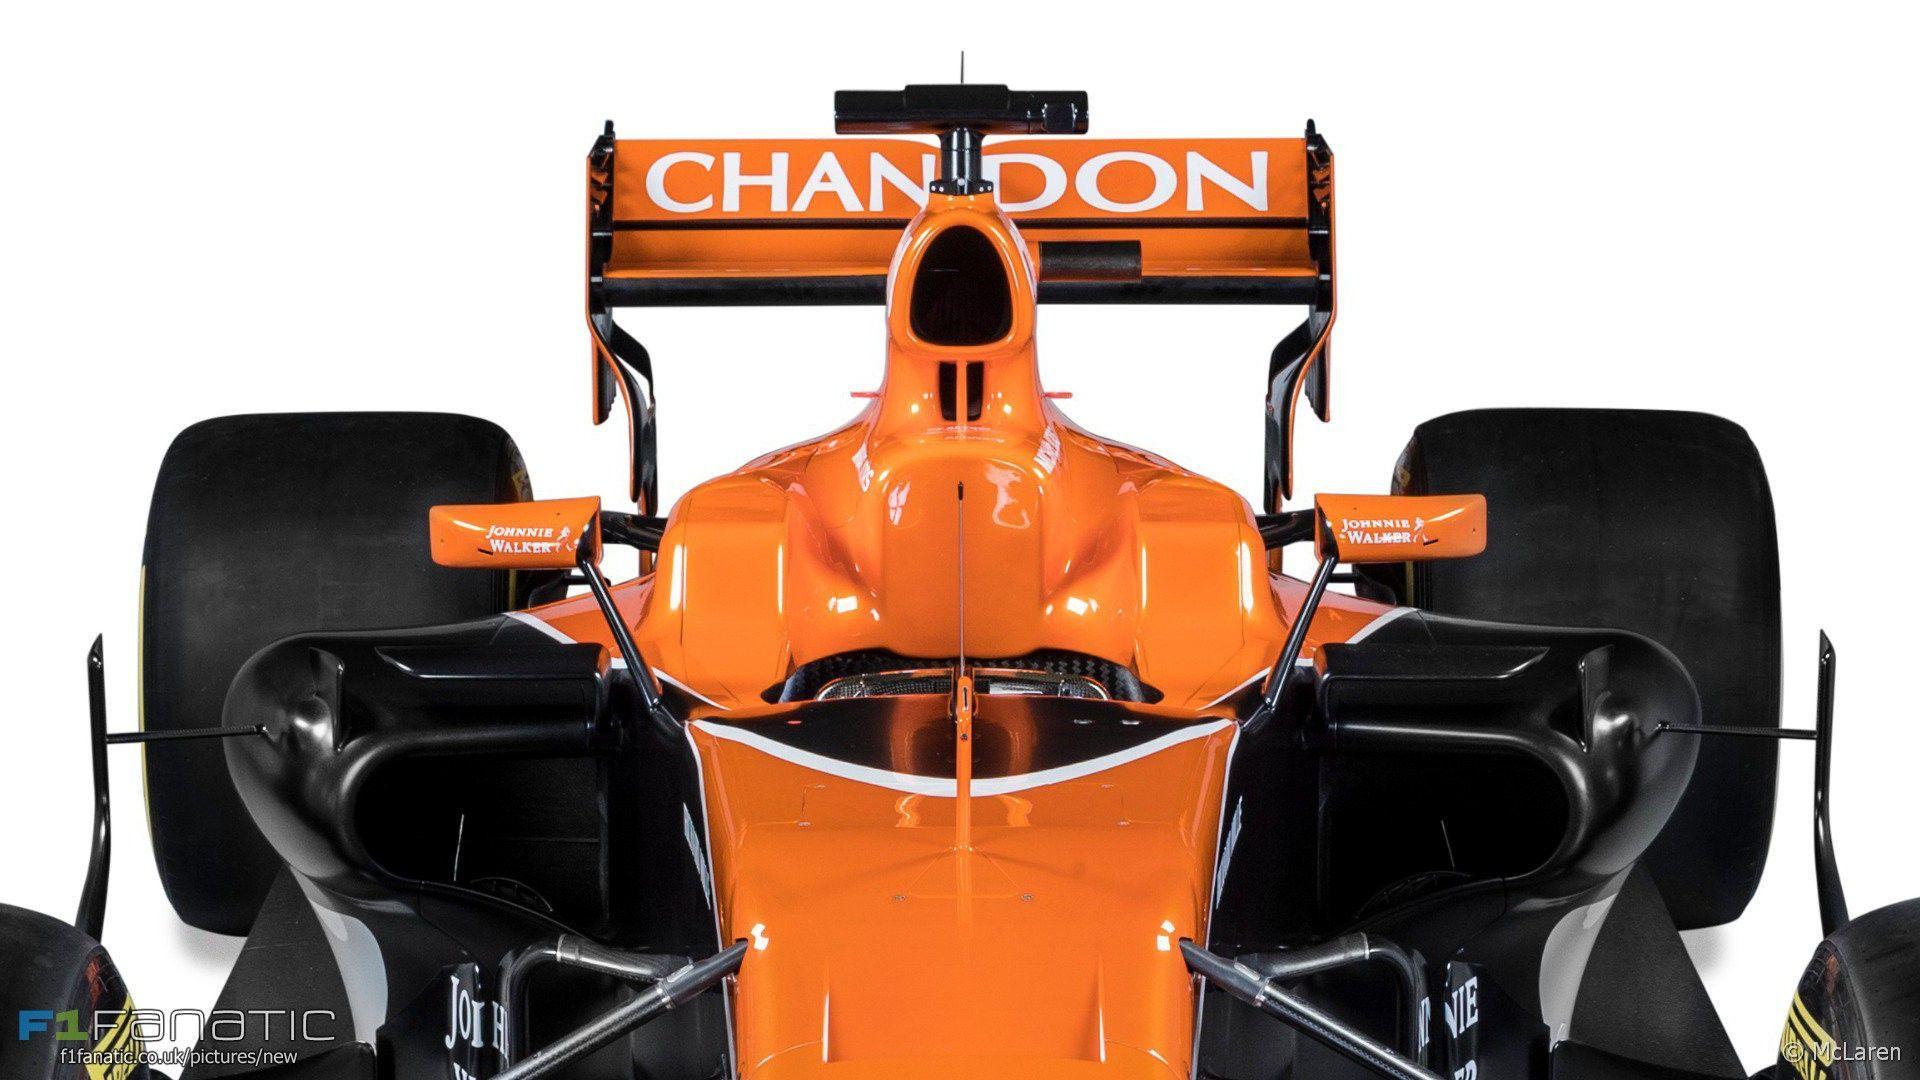 MCL32: Technical analysis of the new 2017 McLaren